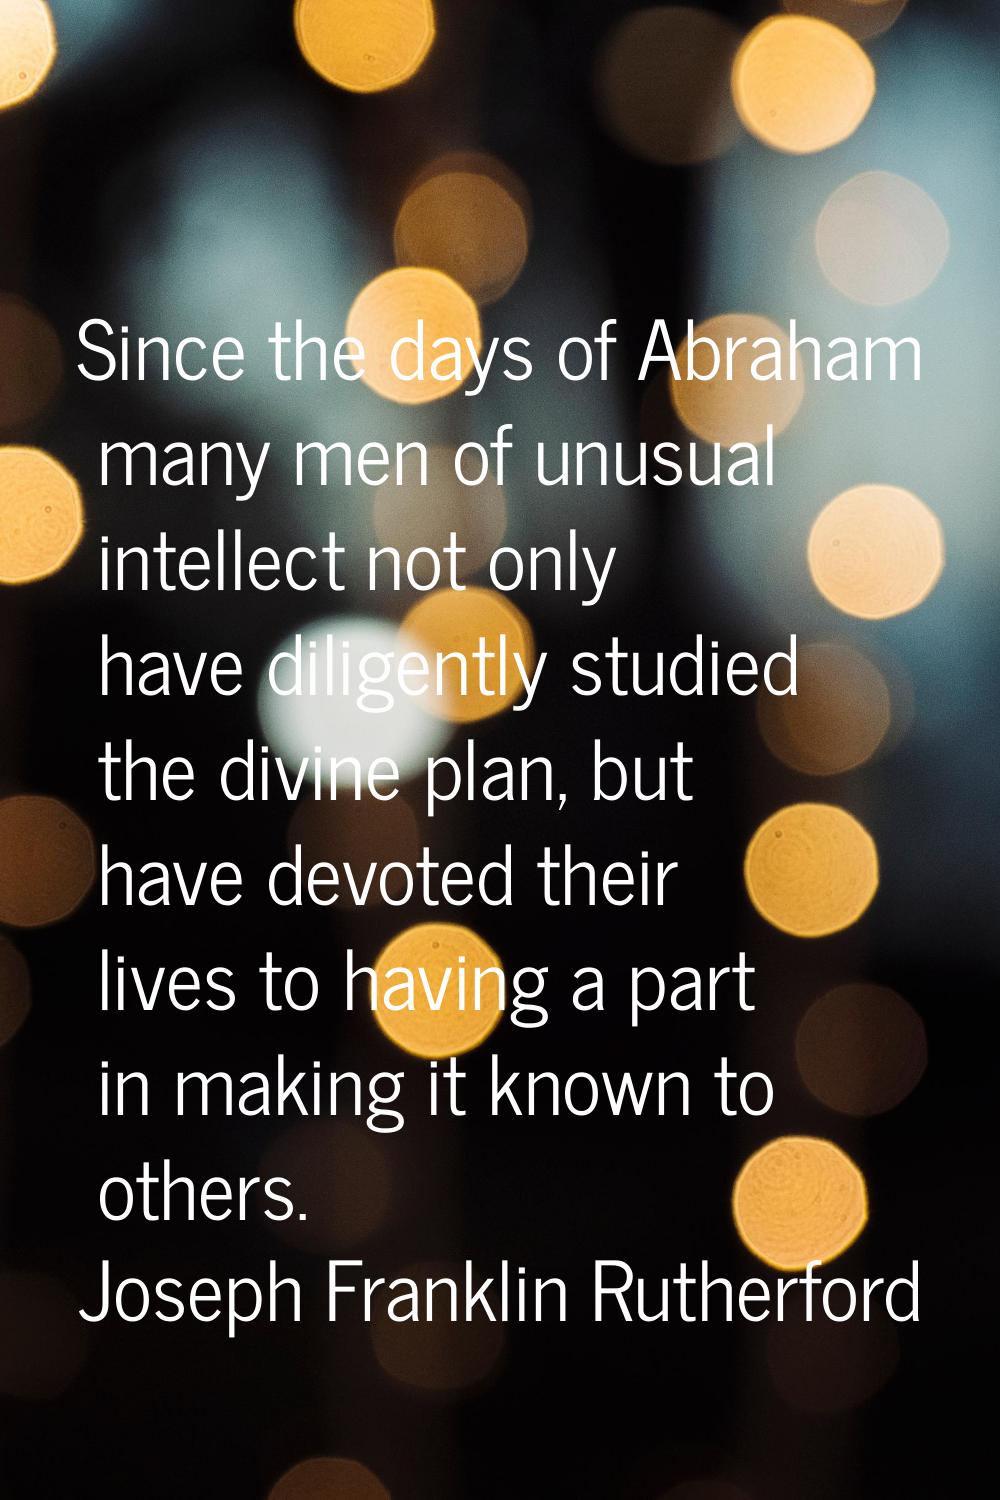 Since the days of Abraham many men of unusual intellect not only have diligently studied the divine